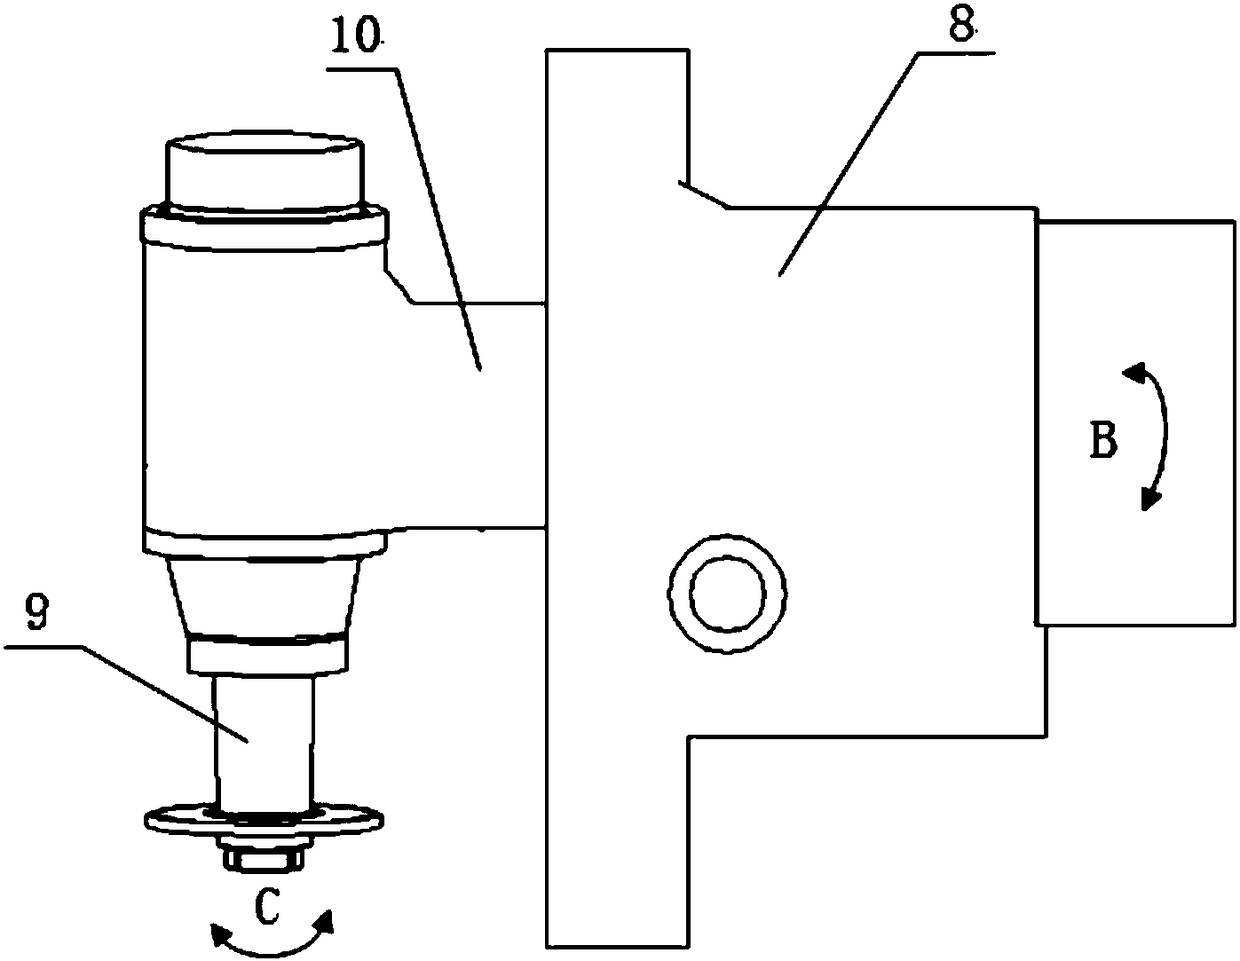 Cutter head grinding device